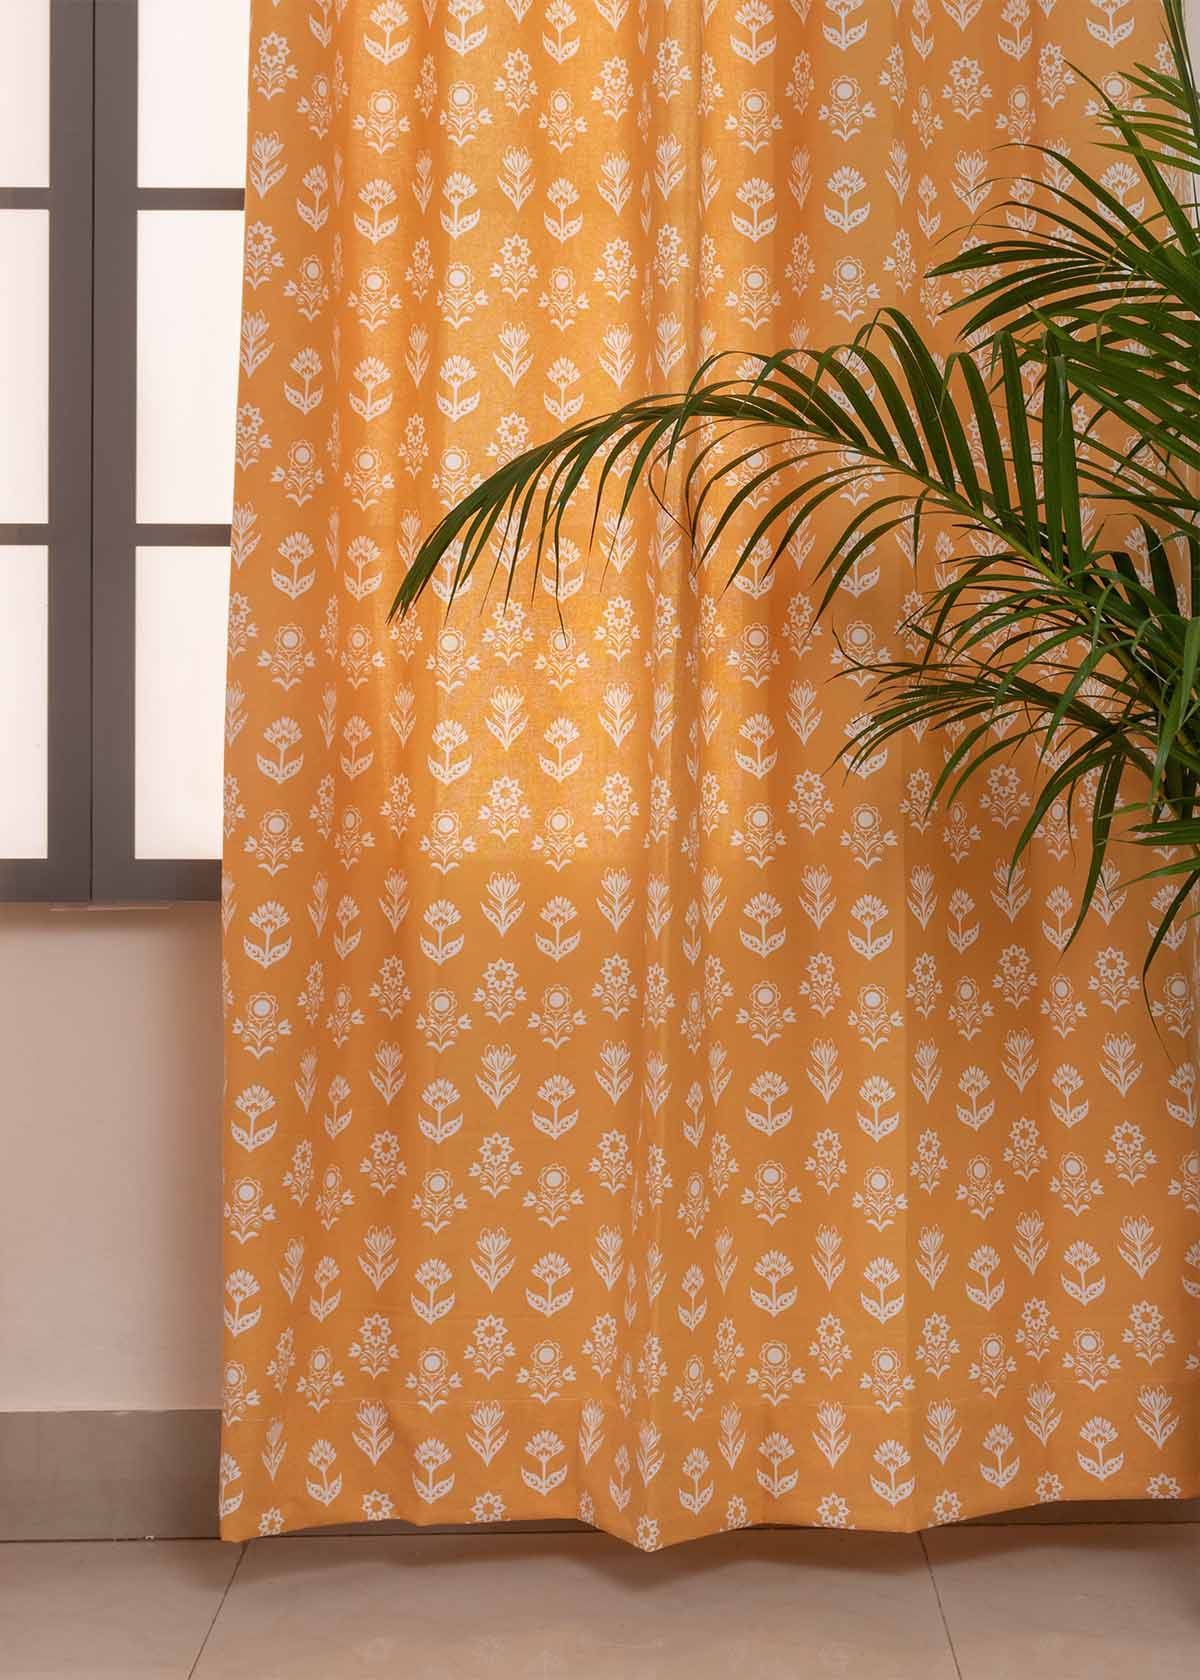 Dahlia 100% cotton floral curtain for living room - Room darkening - Mustard - Pack of 1 - Pack of 1